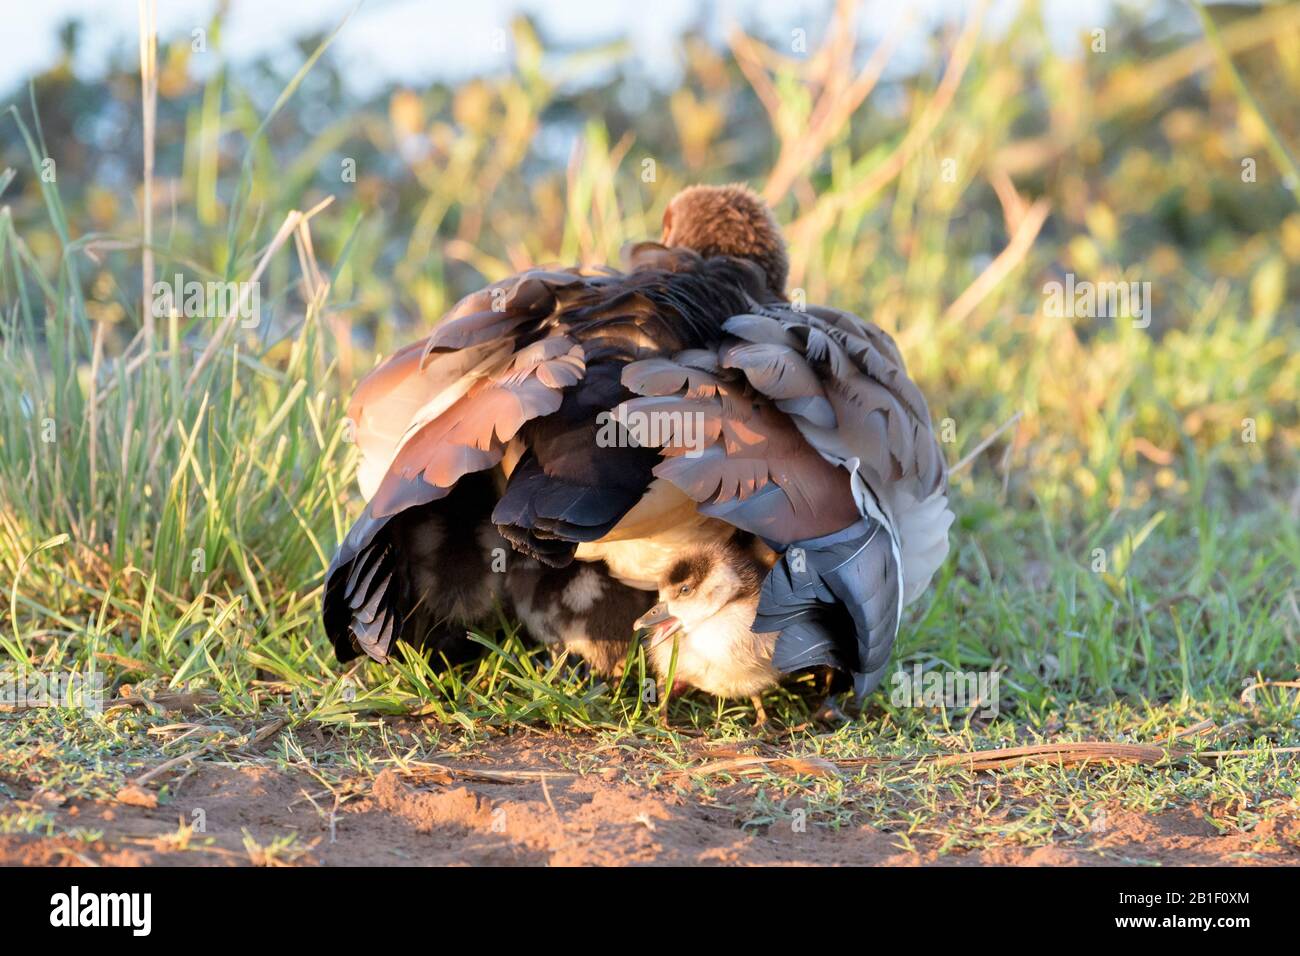 Egyptian goose (Alopochen aegyptiaca) family, chick hiding under mother, Kruger National Park, South Africa, Stock Photo